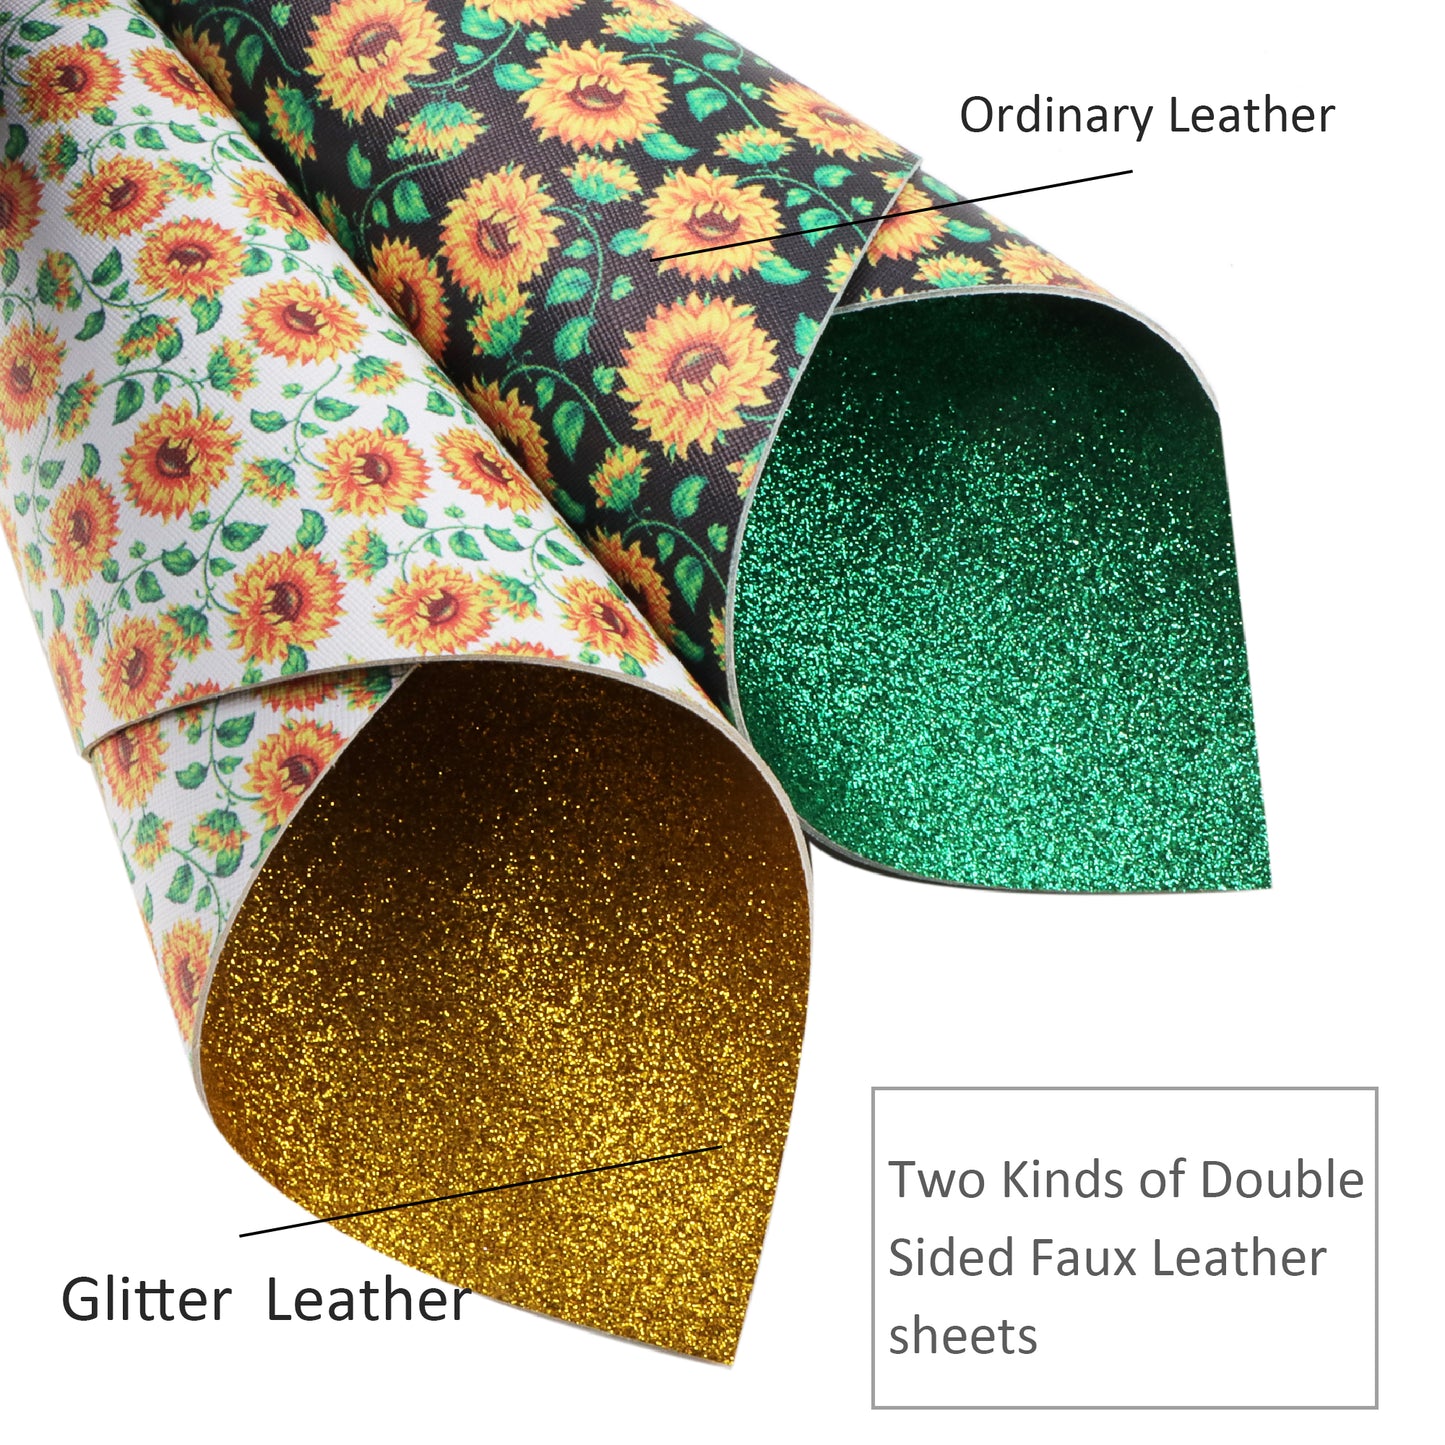 Sunflower Printed Double Sided Faux Leather Sets Wholesale